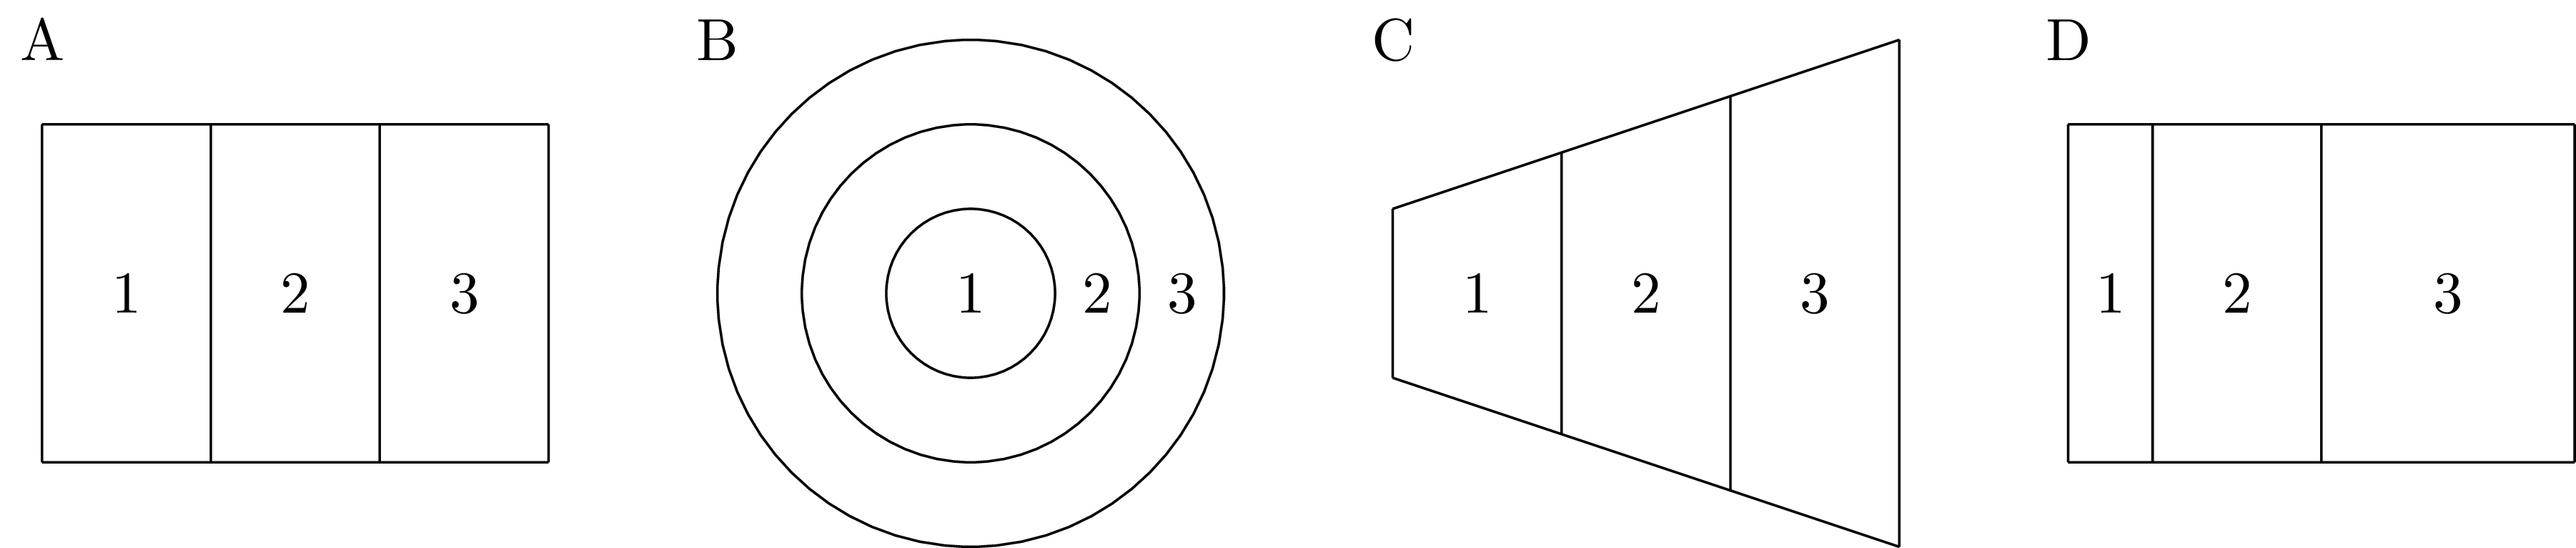 Though they are quite different, the geometries shown in panels A, B, C, and D each have the same adjacency graph. Therefore, each geometry would have the same distribution under the Besag model.